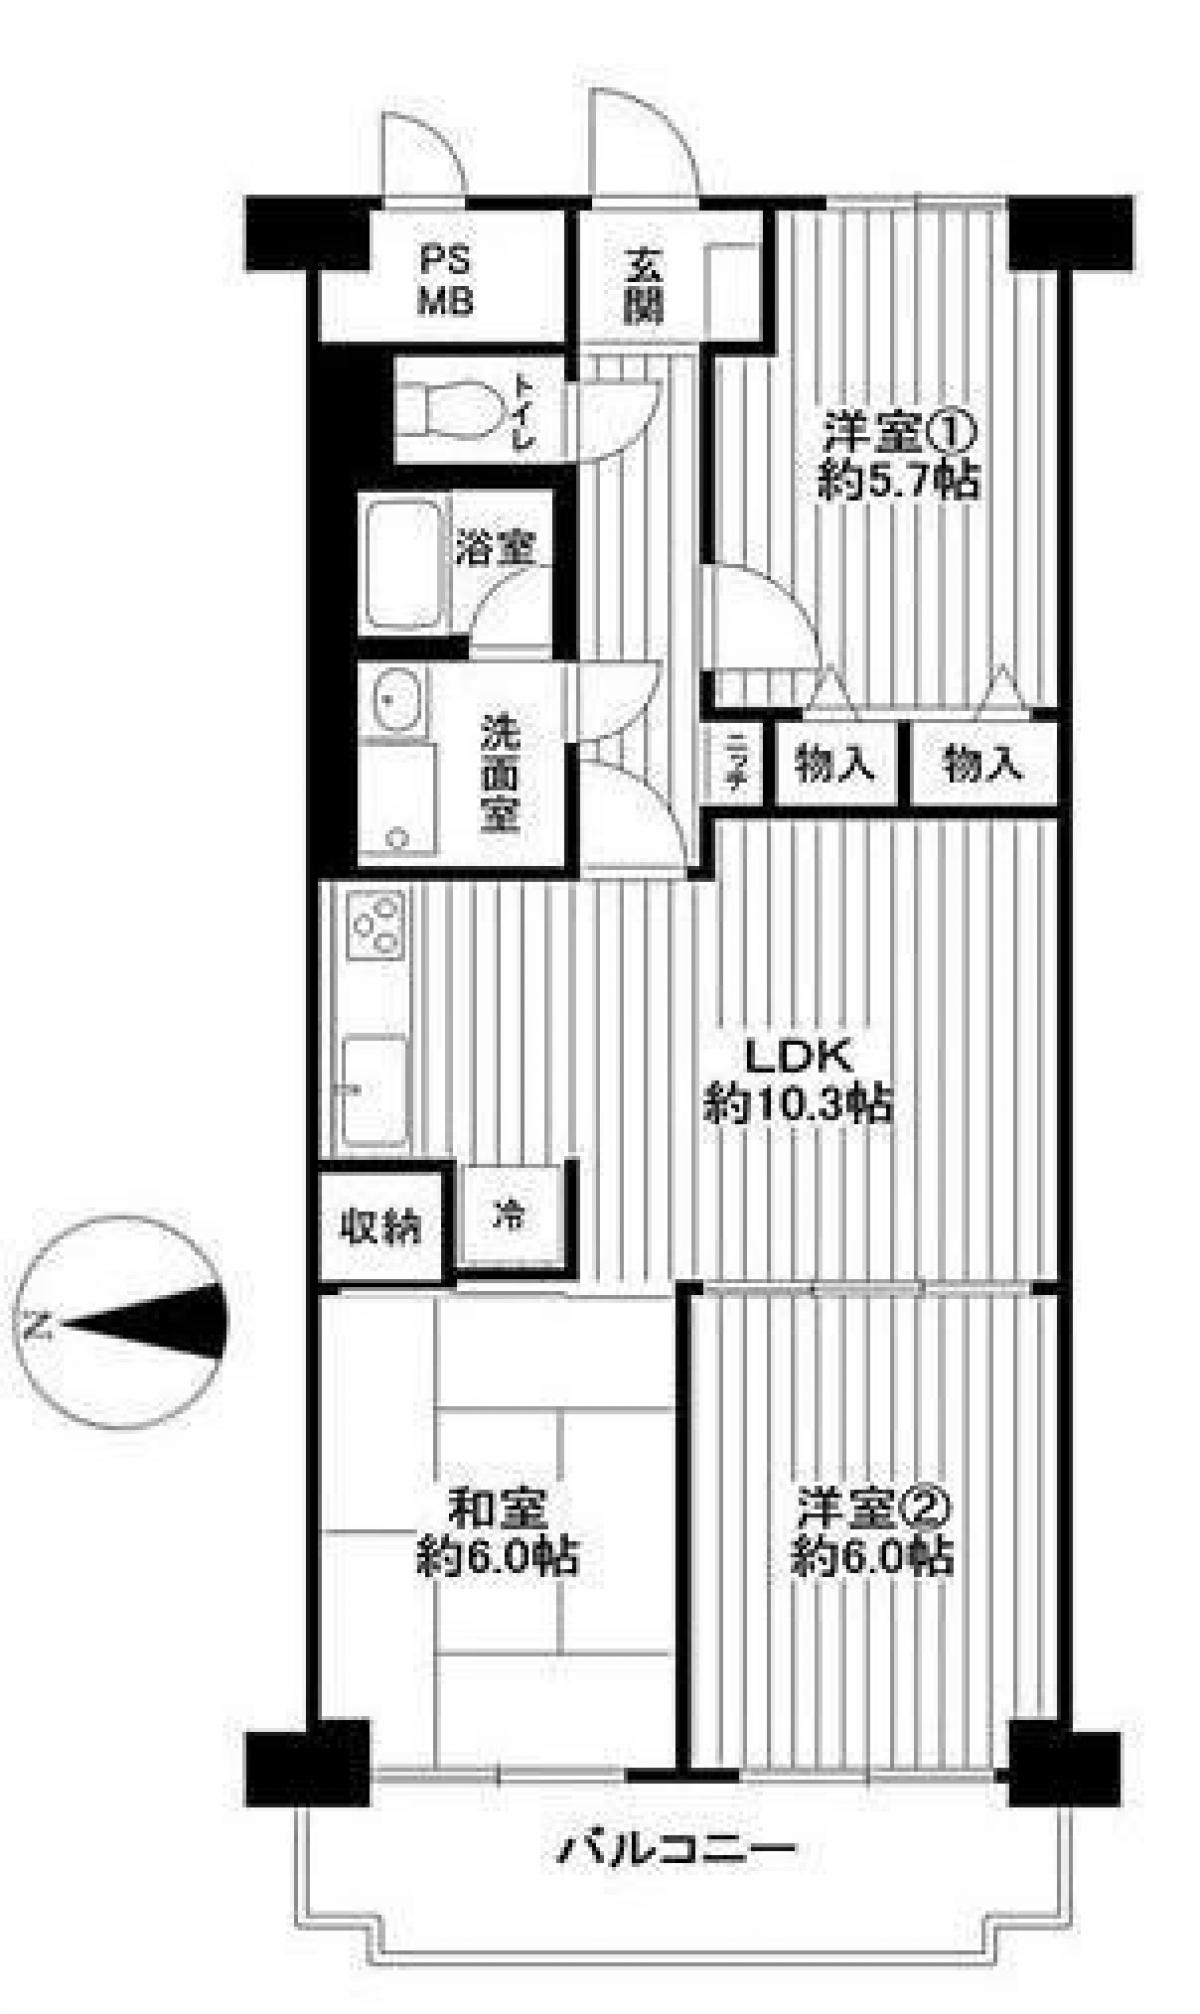 Picture of Apartment For Sale in Kyoto Shi Ukyo Ku, Kyoto, Japan